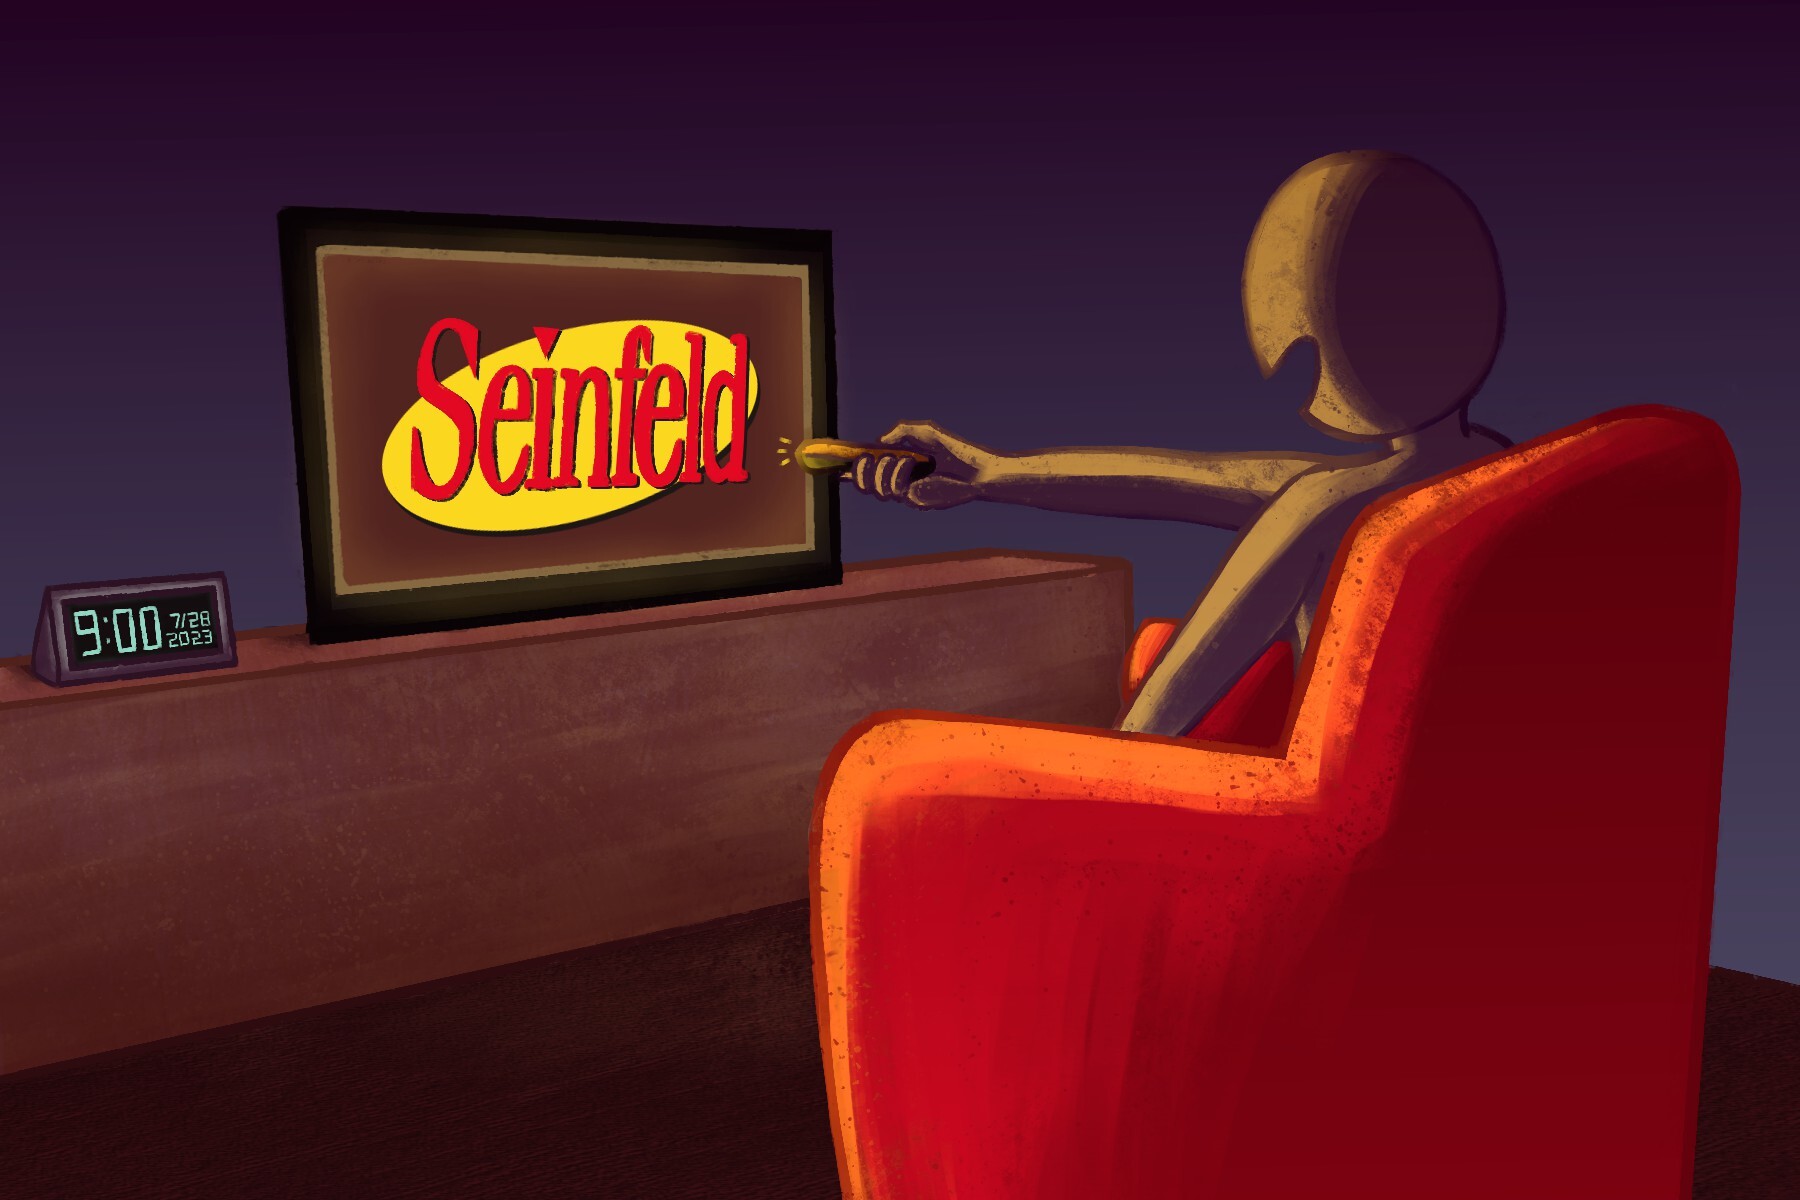 In an article about 'Seinfeld,' a person shrouded in the dark of night reclines in an orange chair and points the remote at a television screen lit up by the 'Seinfeld' logo.